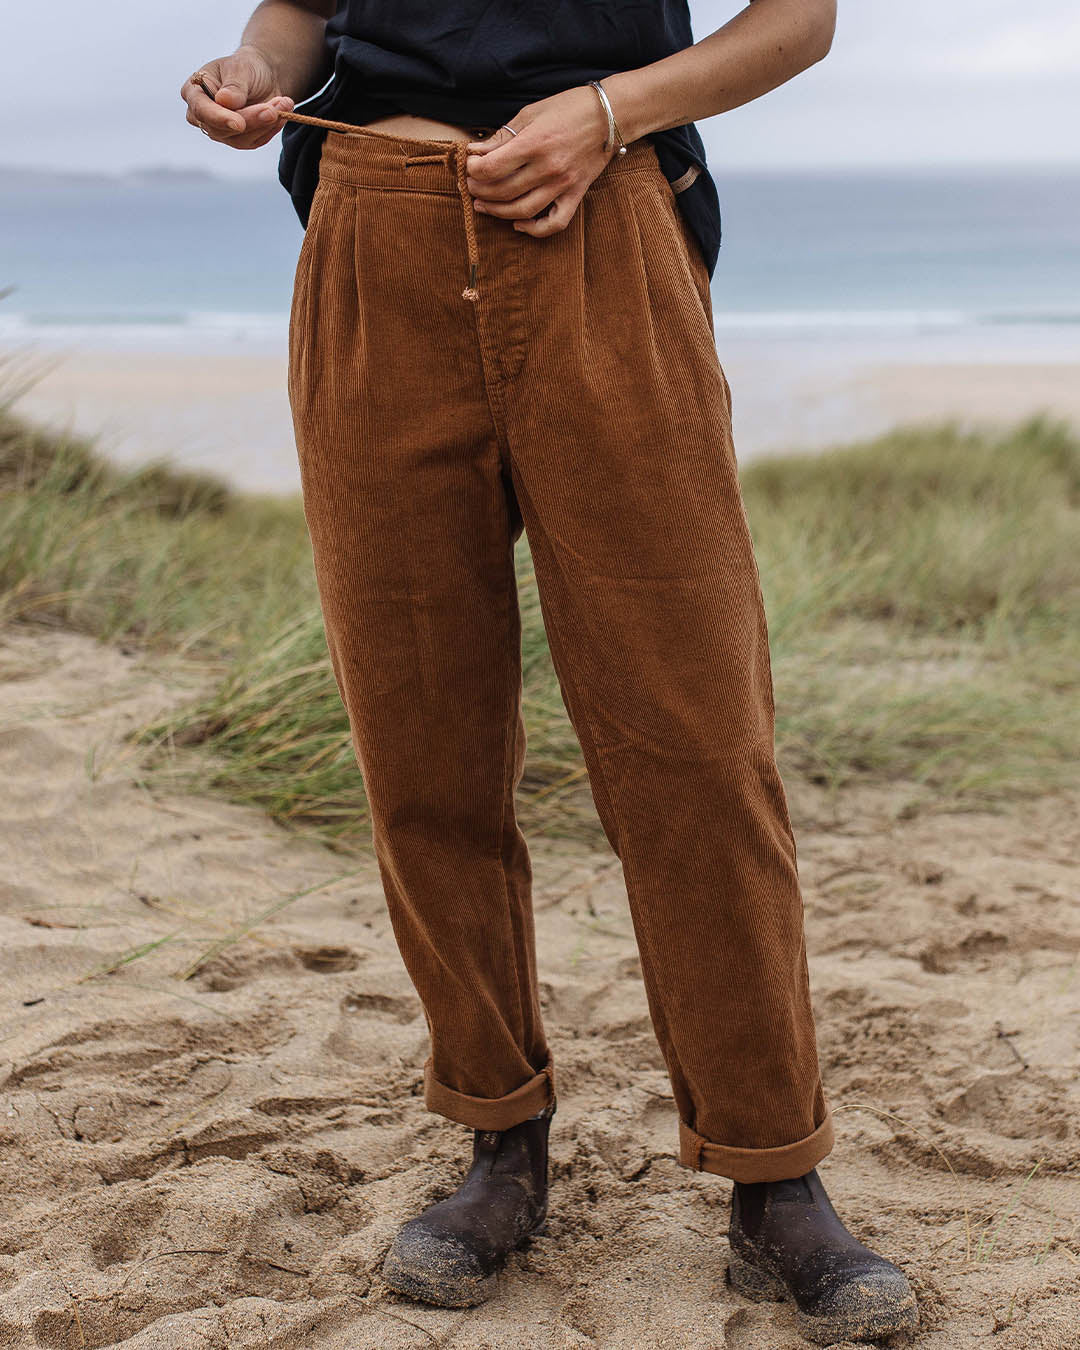 Compass Recycled Corduroy Pants - Coconut